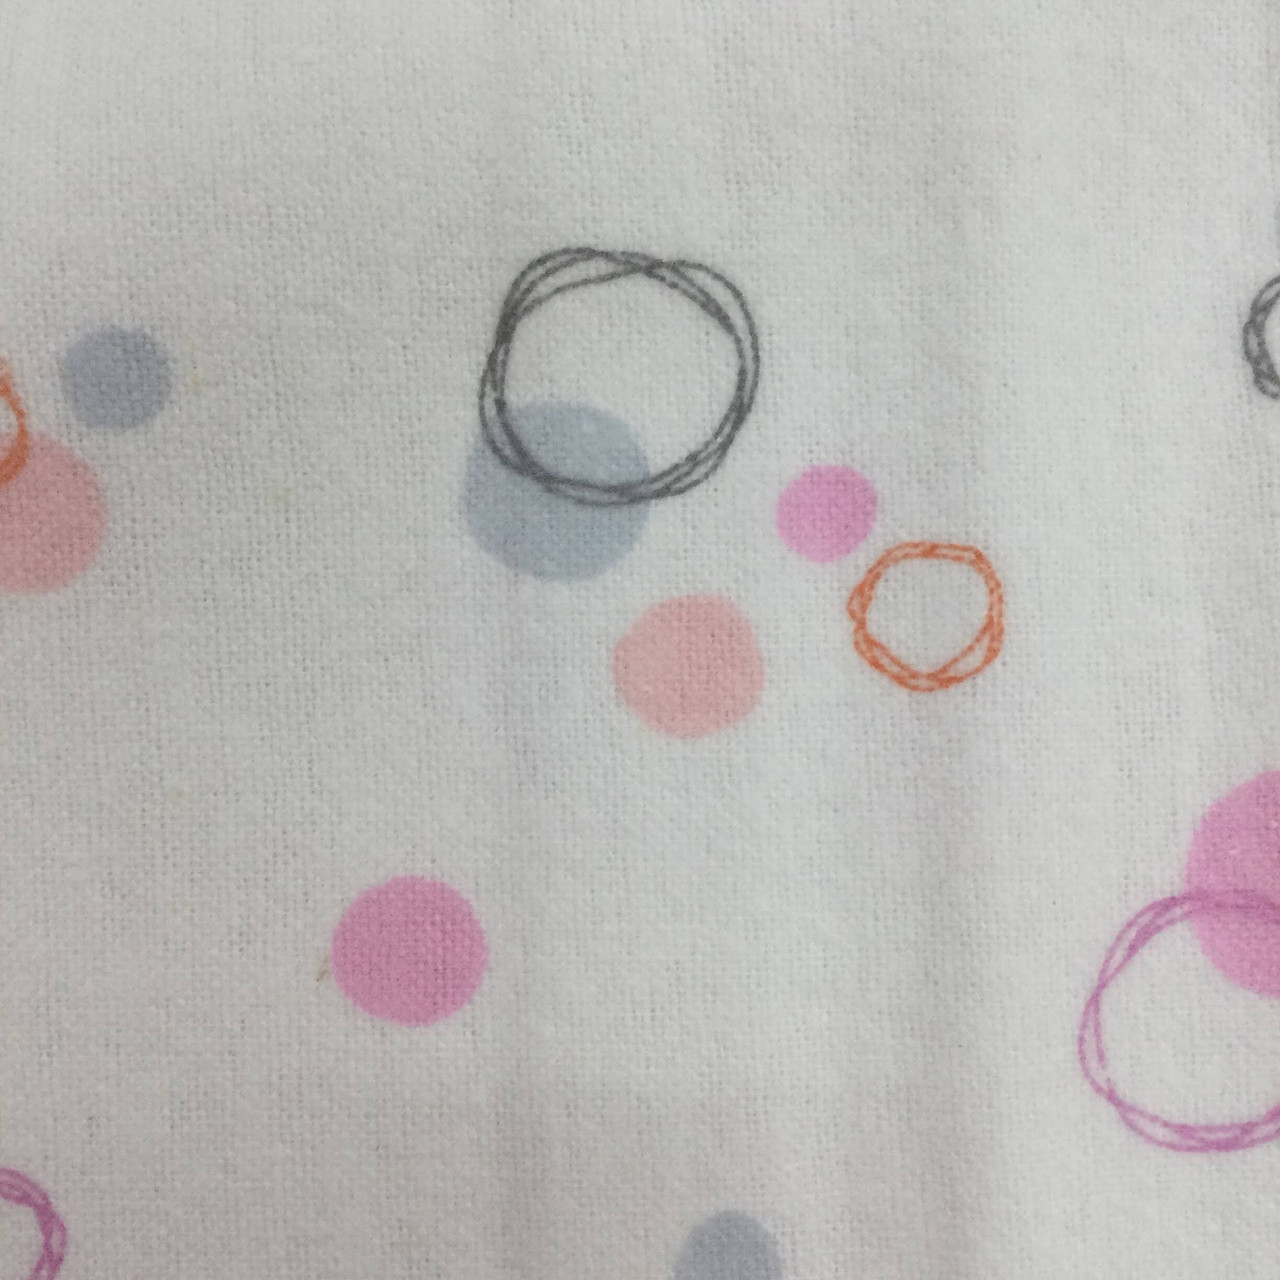 Pink Blue & Yellow Dots on Gray Flannel Fabric by the Yard Half